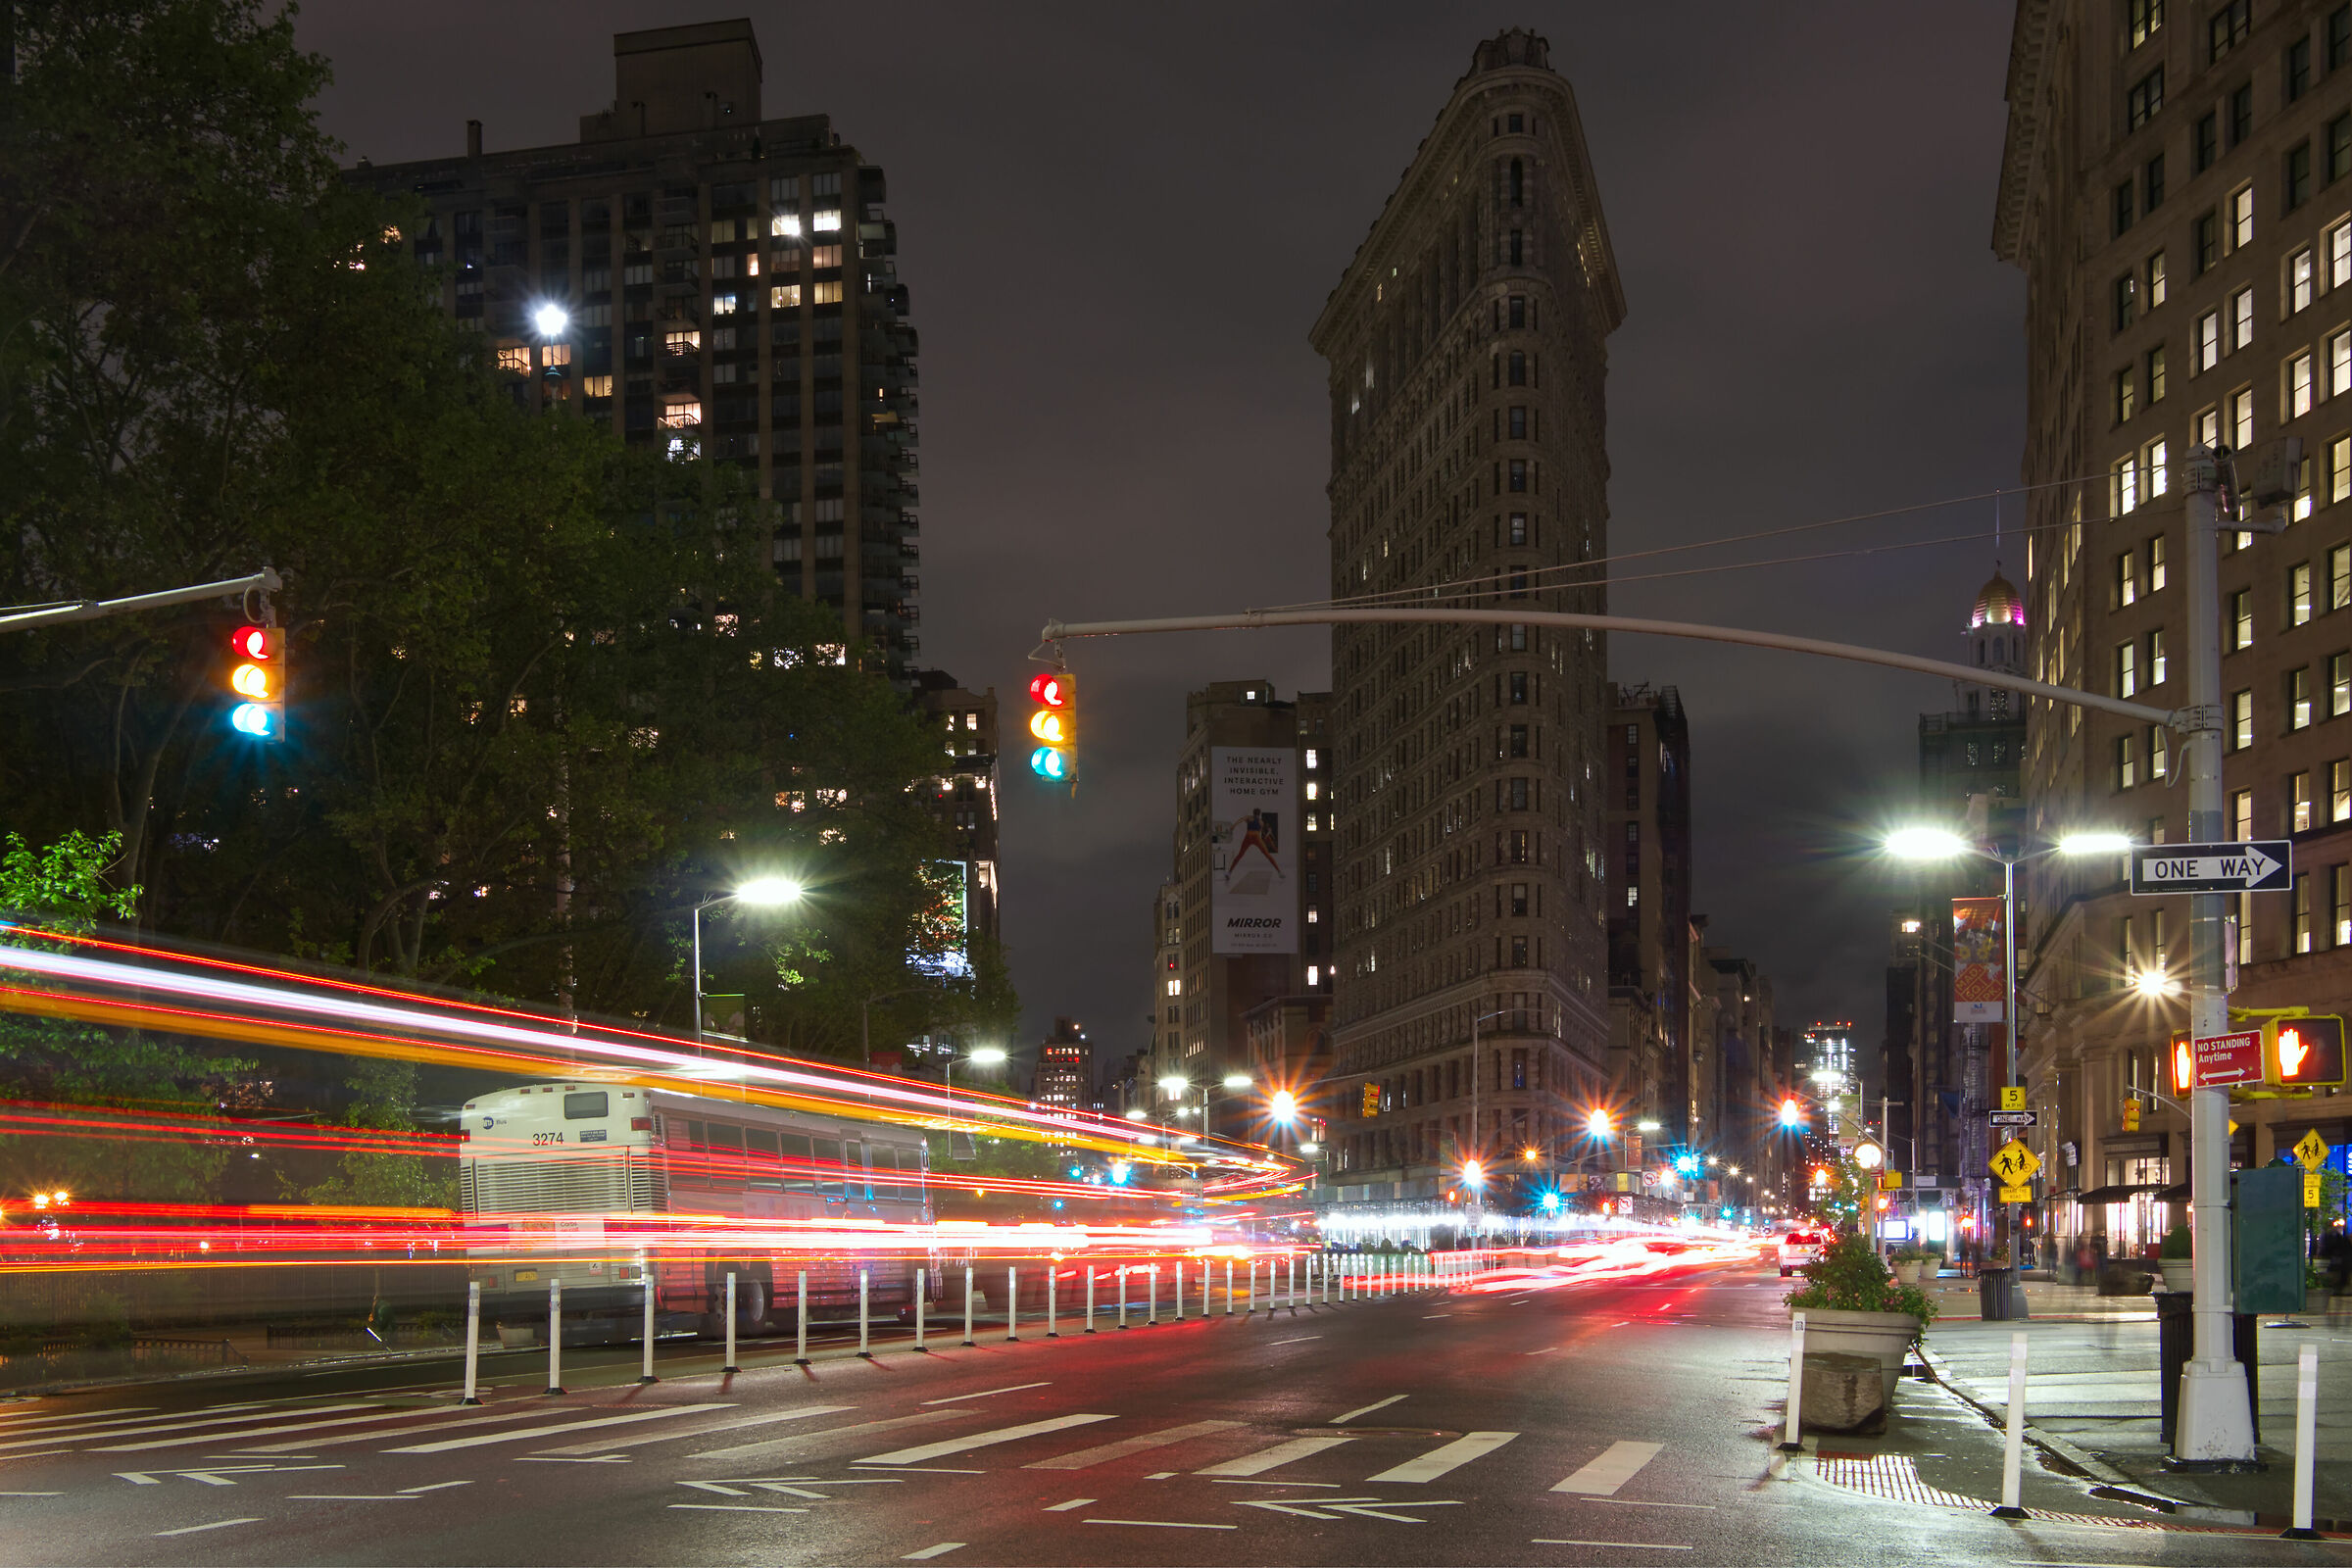 Light trails in front of the Flatiron building...